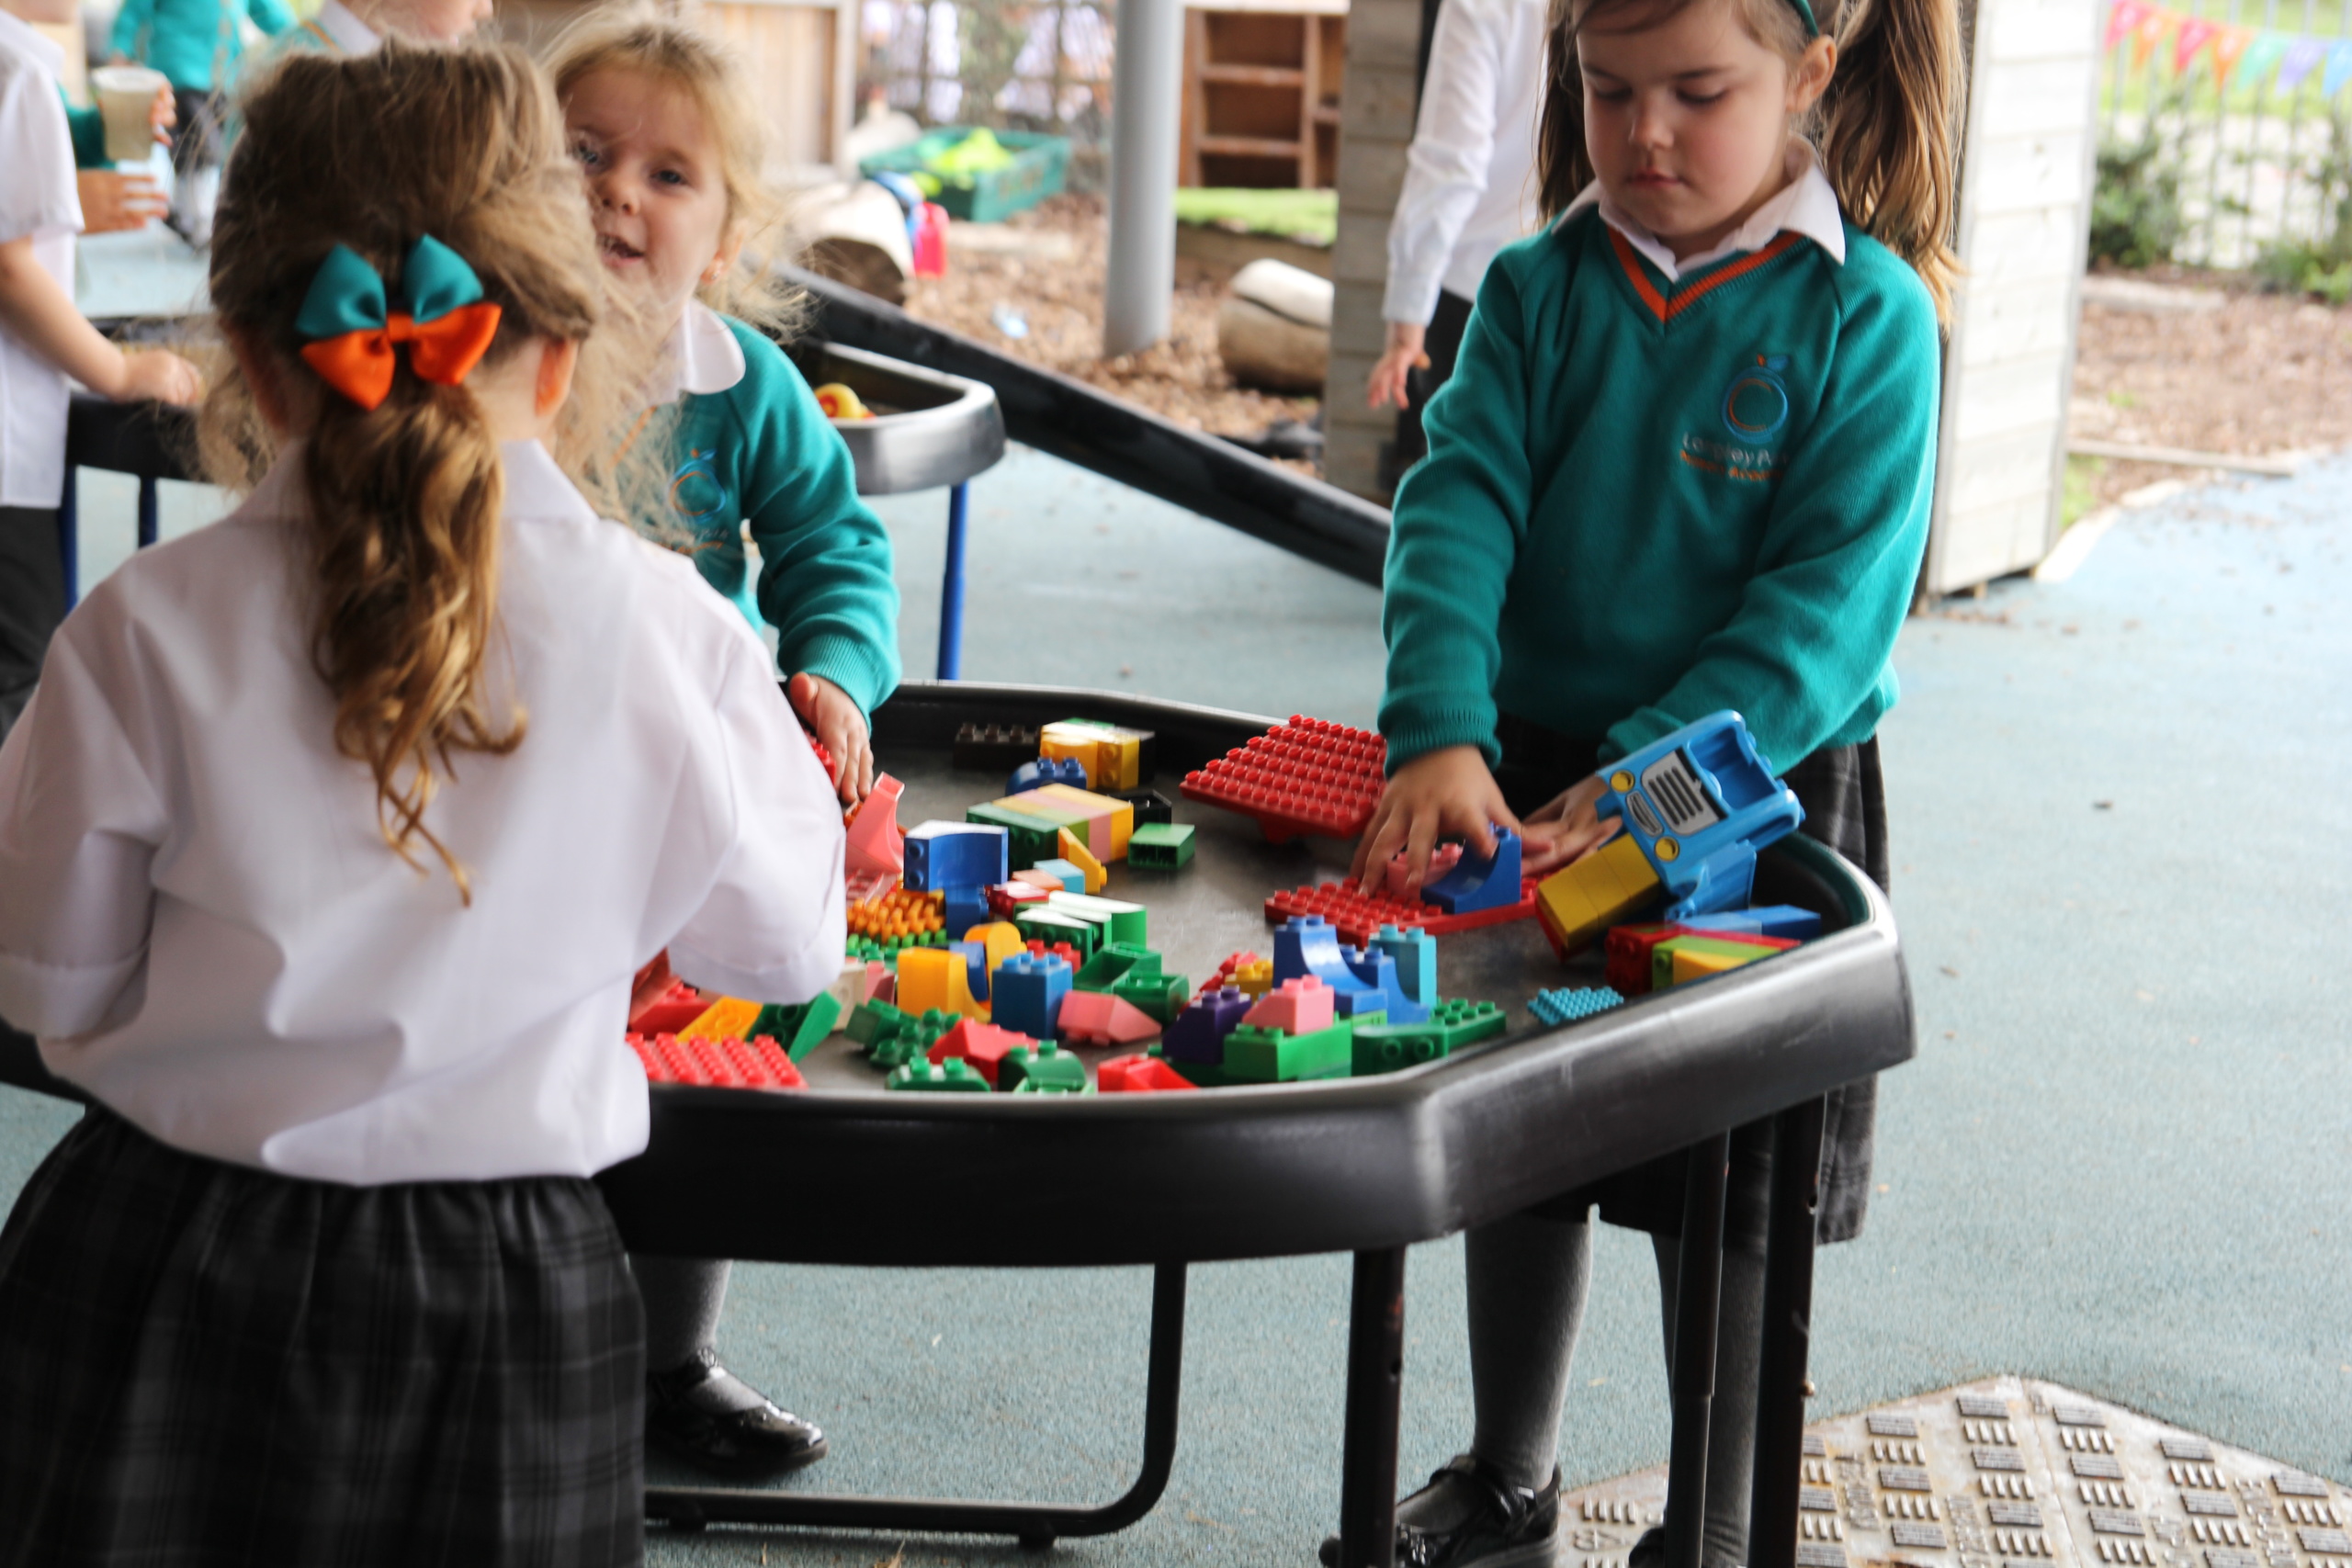 Three young children stand around a table and play with colourful bricks outside